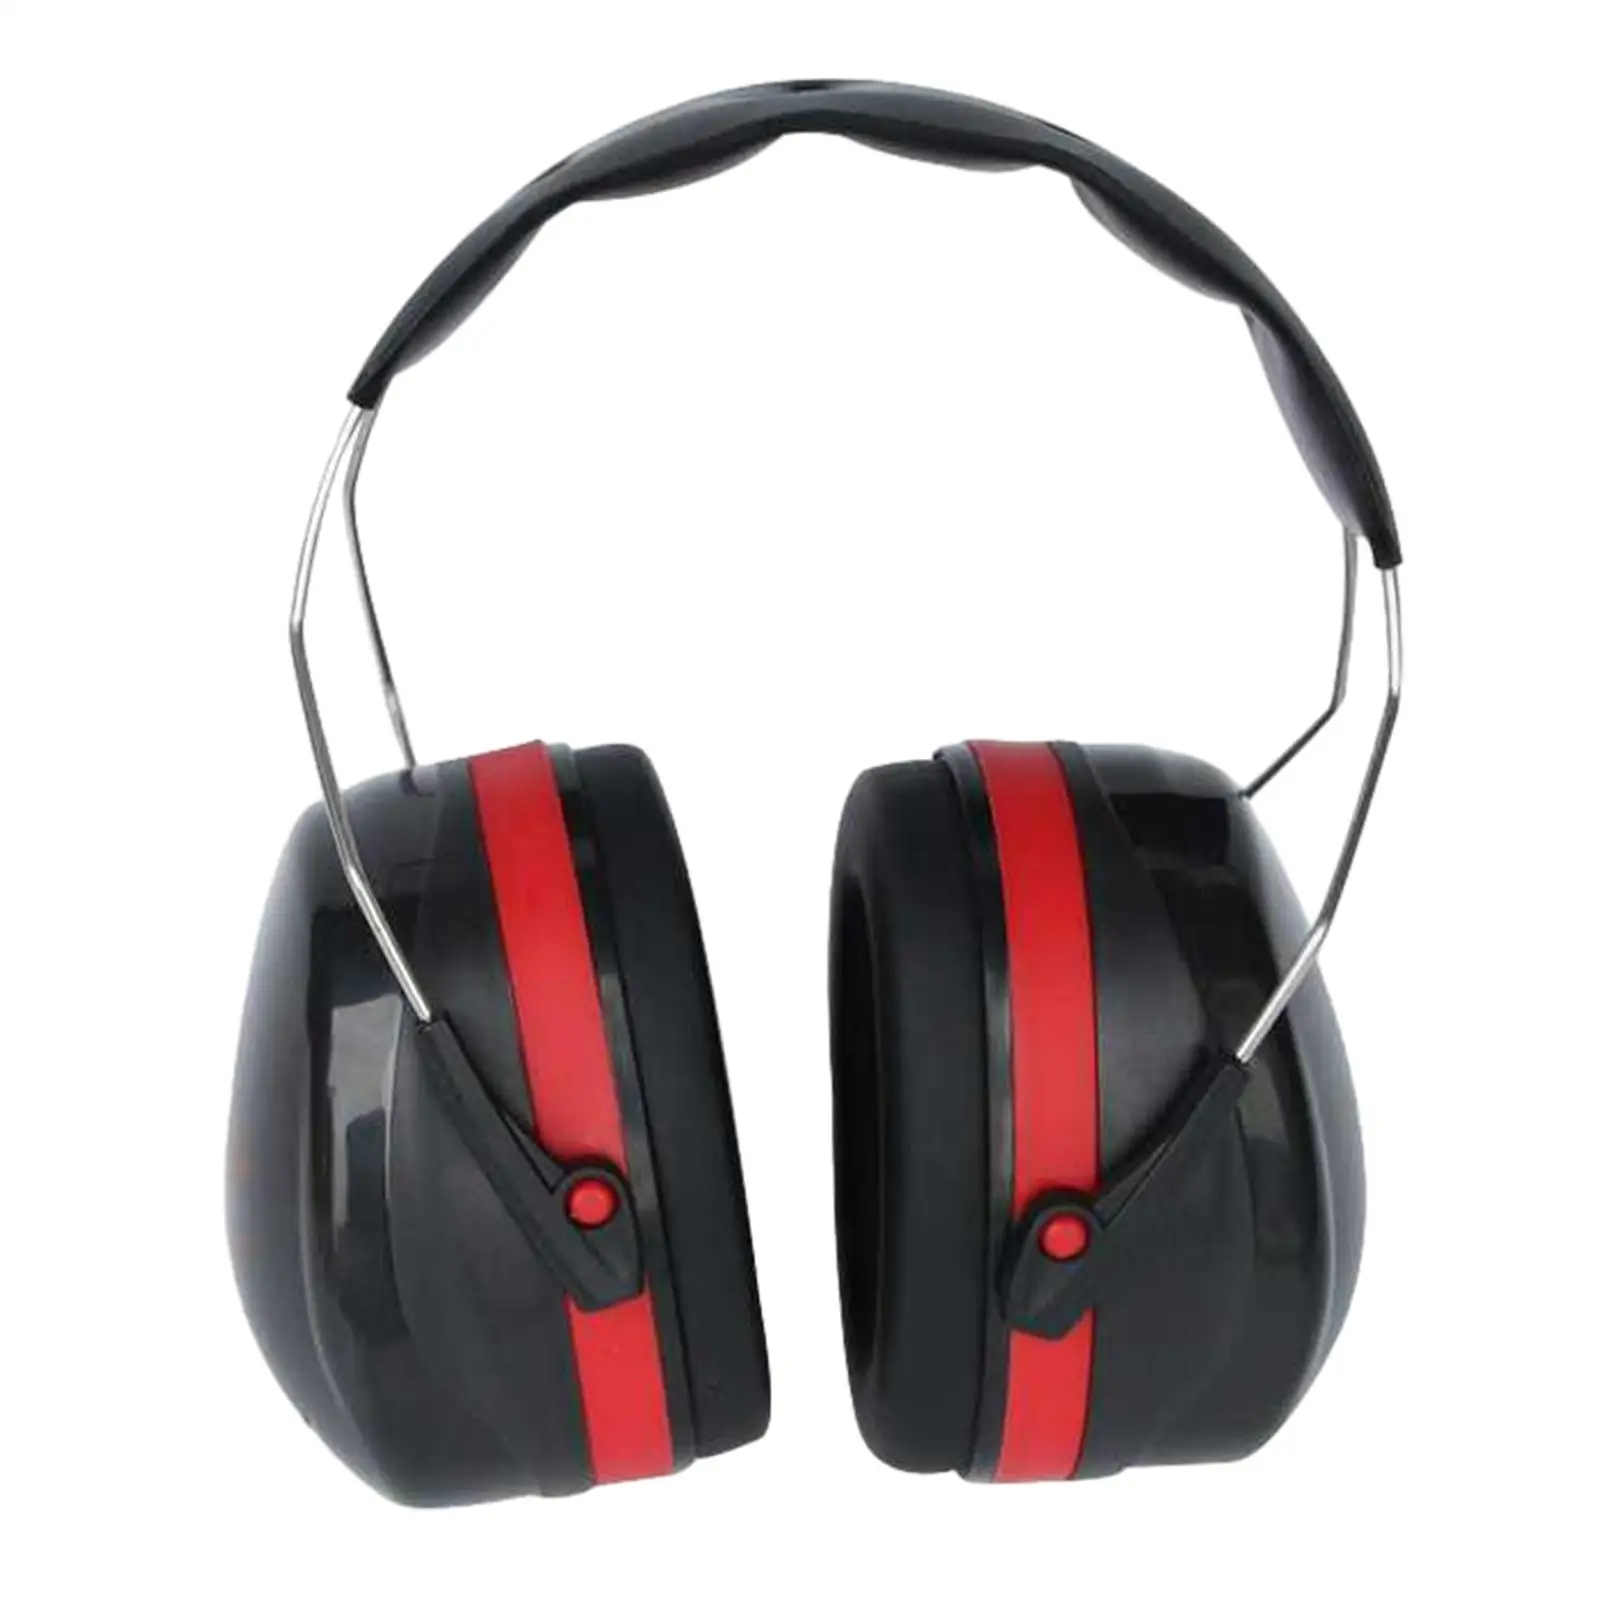 Noise Reduction Headphones Sound Blocking No Pressure to Wear 35dB Earmuffs for Workshop Sleeping Mowing Lawn Airplane Play Drum